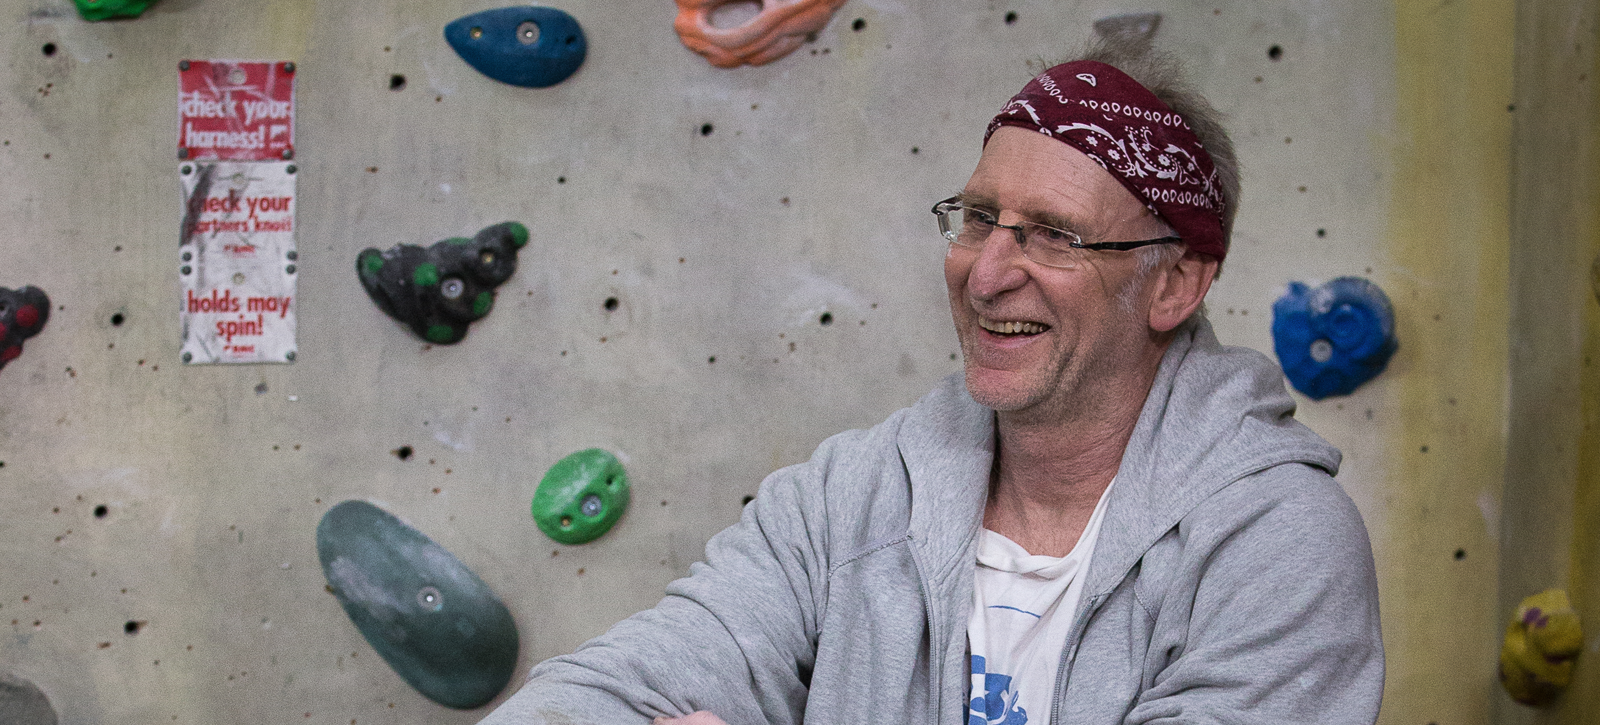 Free Entry for Over 70s - The Climbing Academy